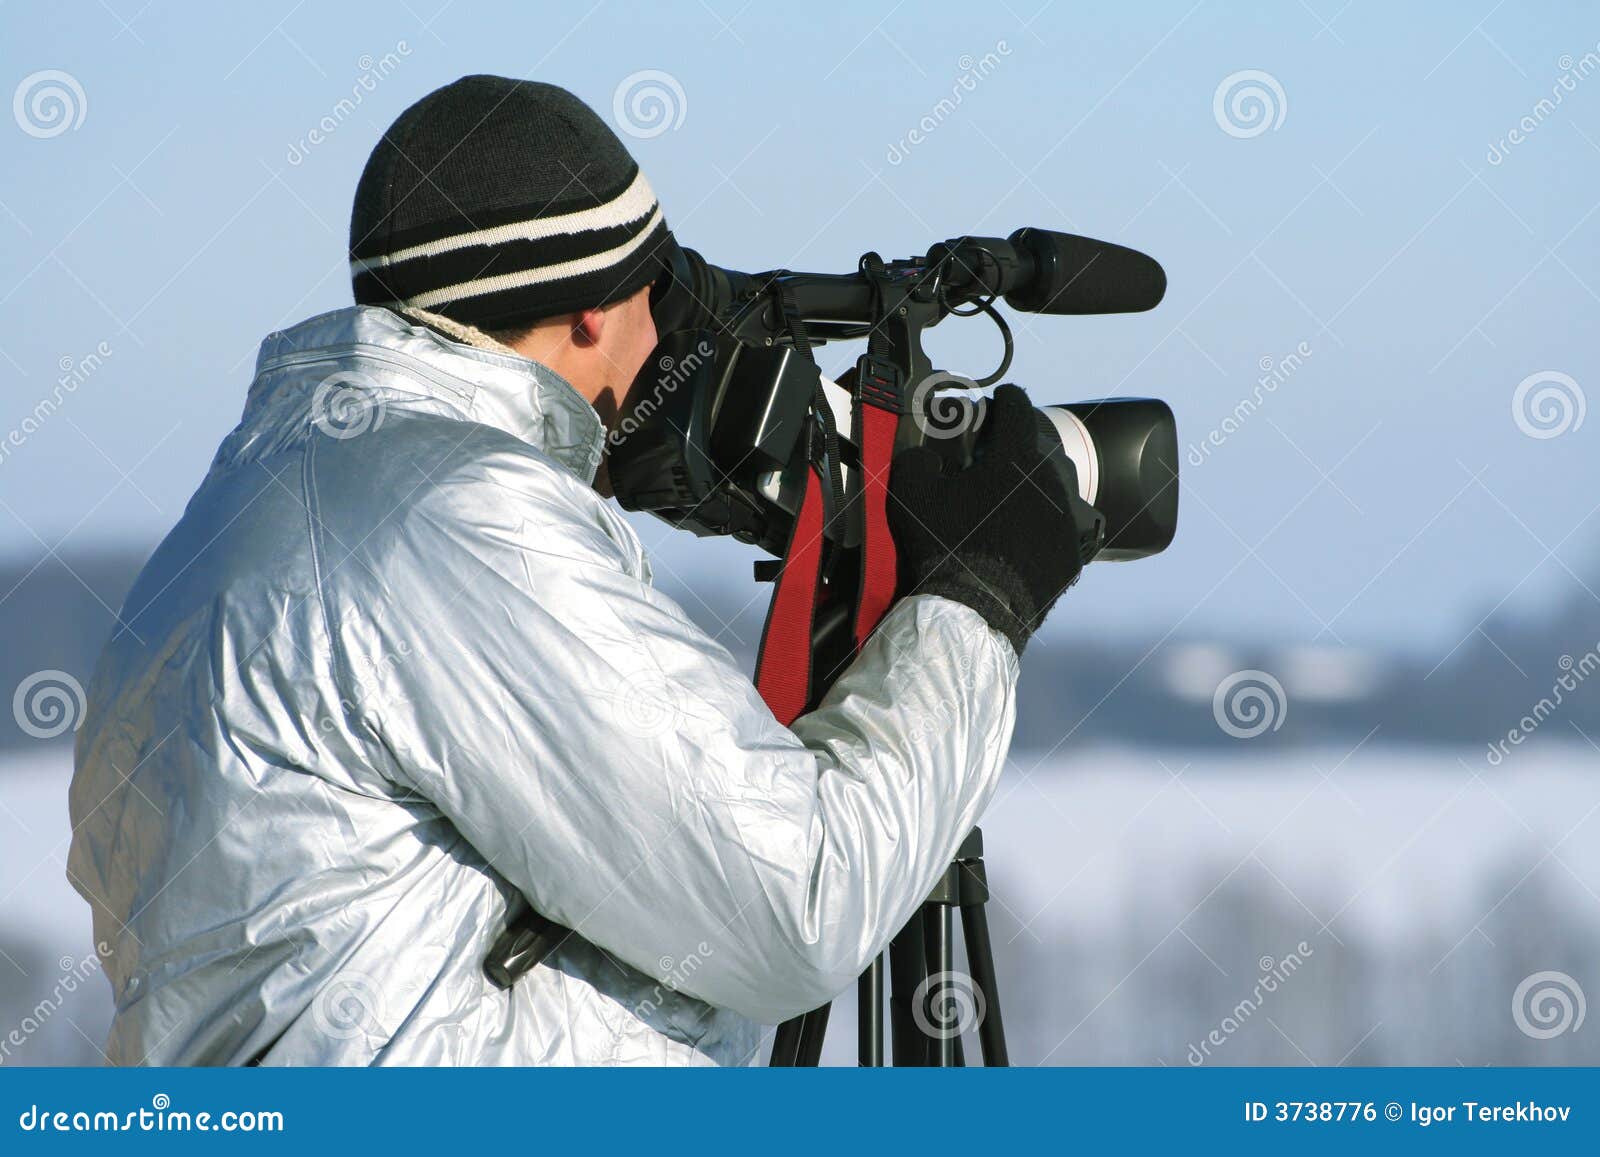 the journalist with a videocamera